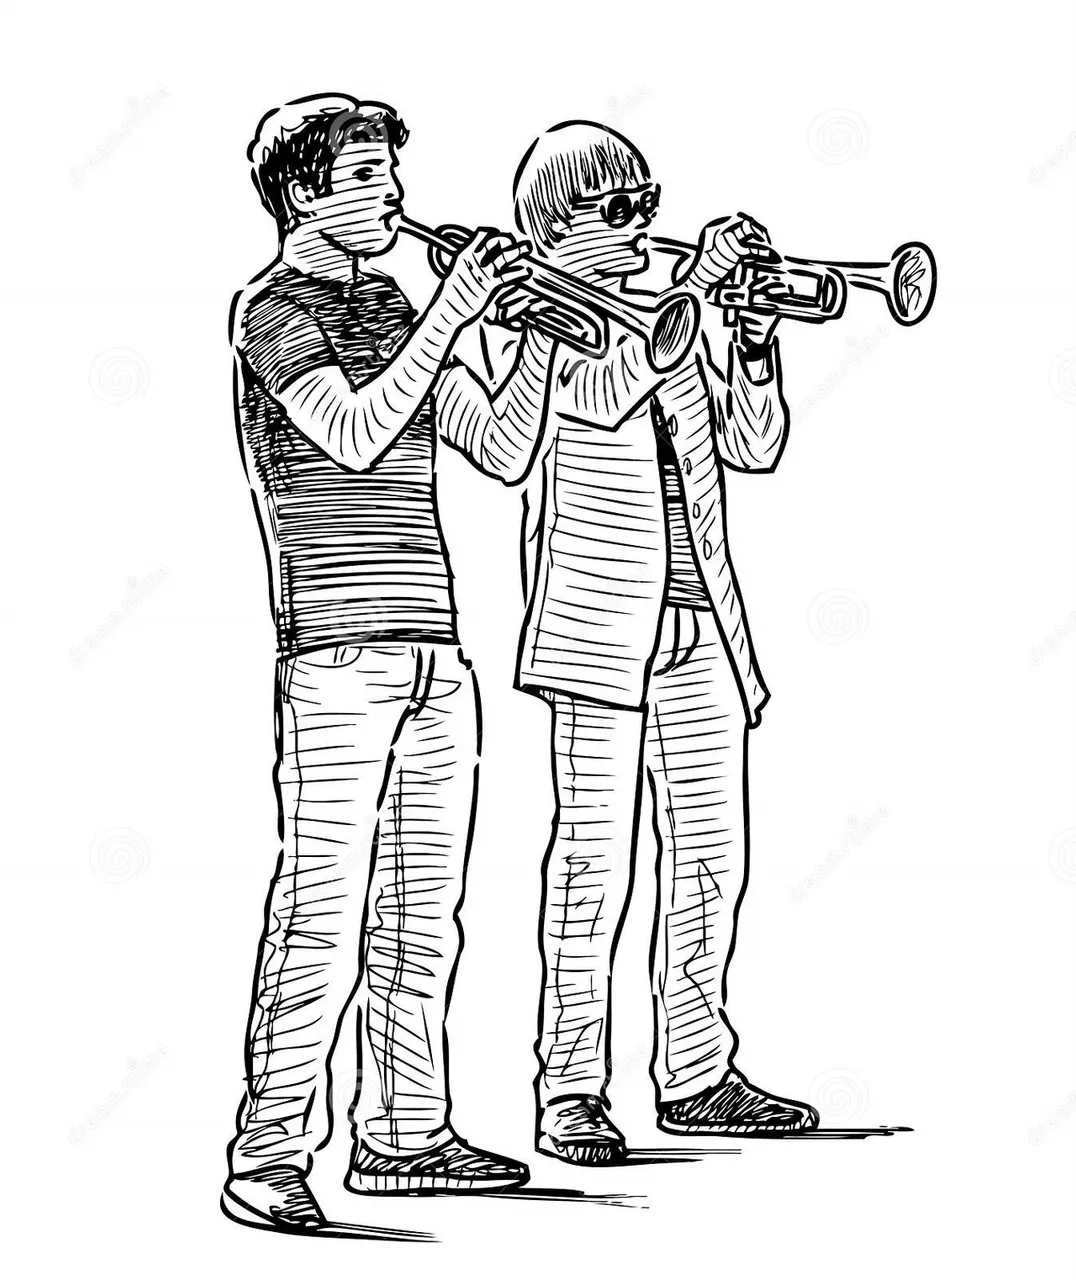 sketch_two_young_trumpeters_playing_street_183207378.jpg